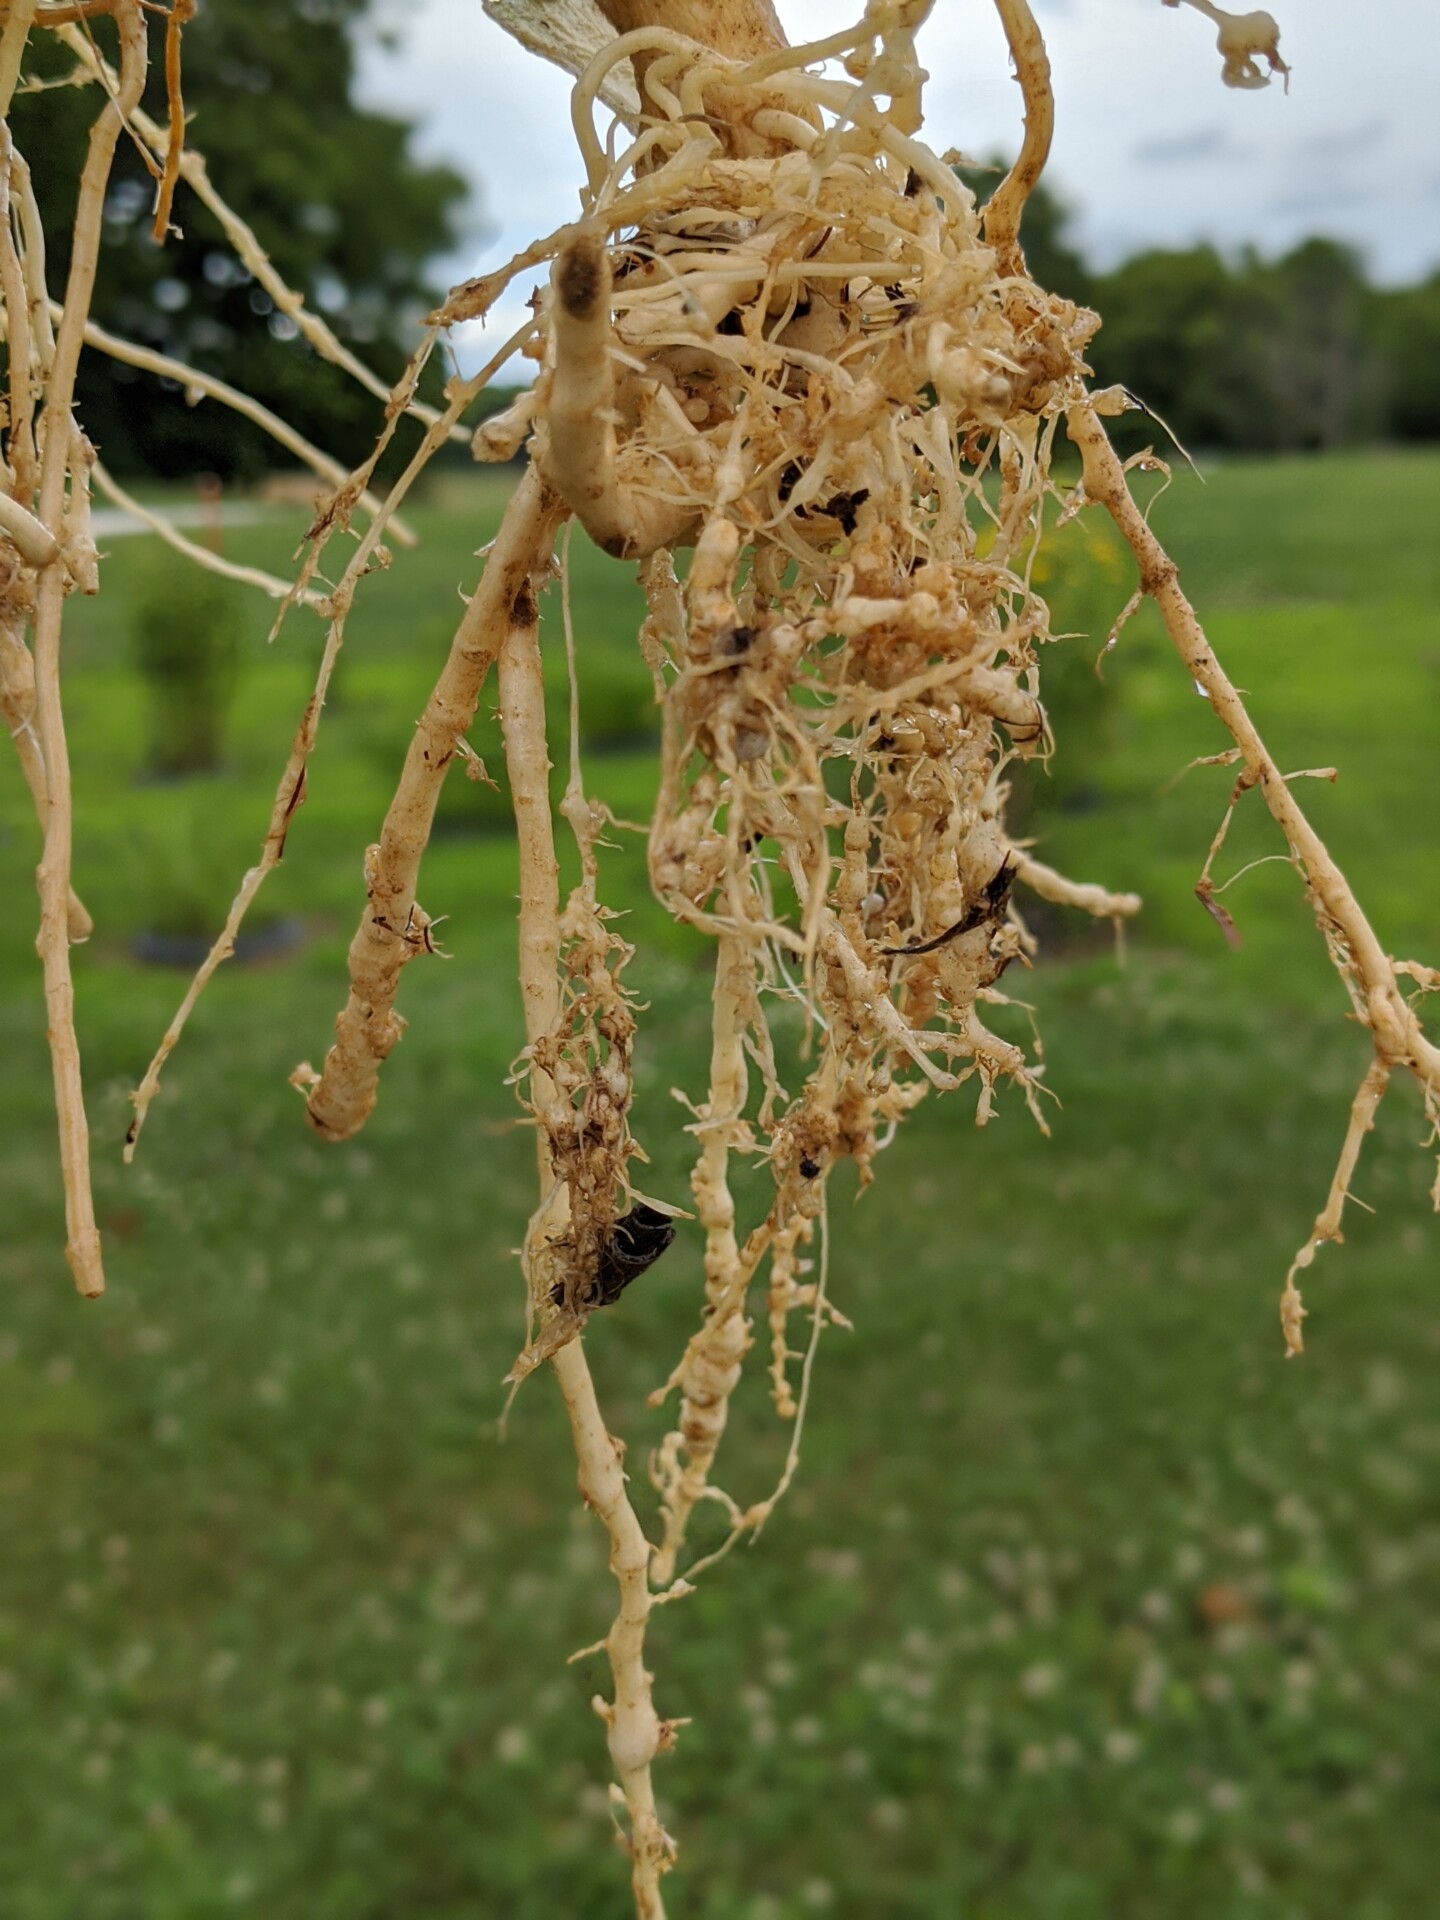 Root nematode galls on a watermelon root system